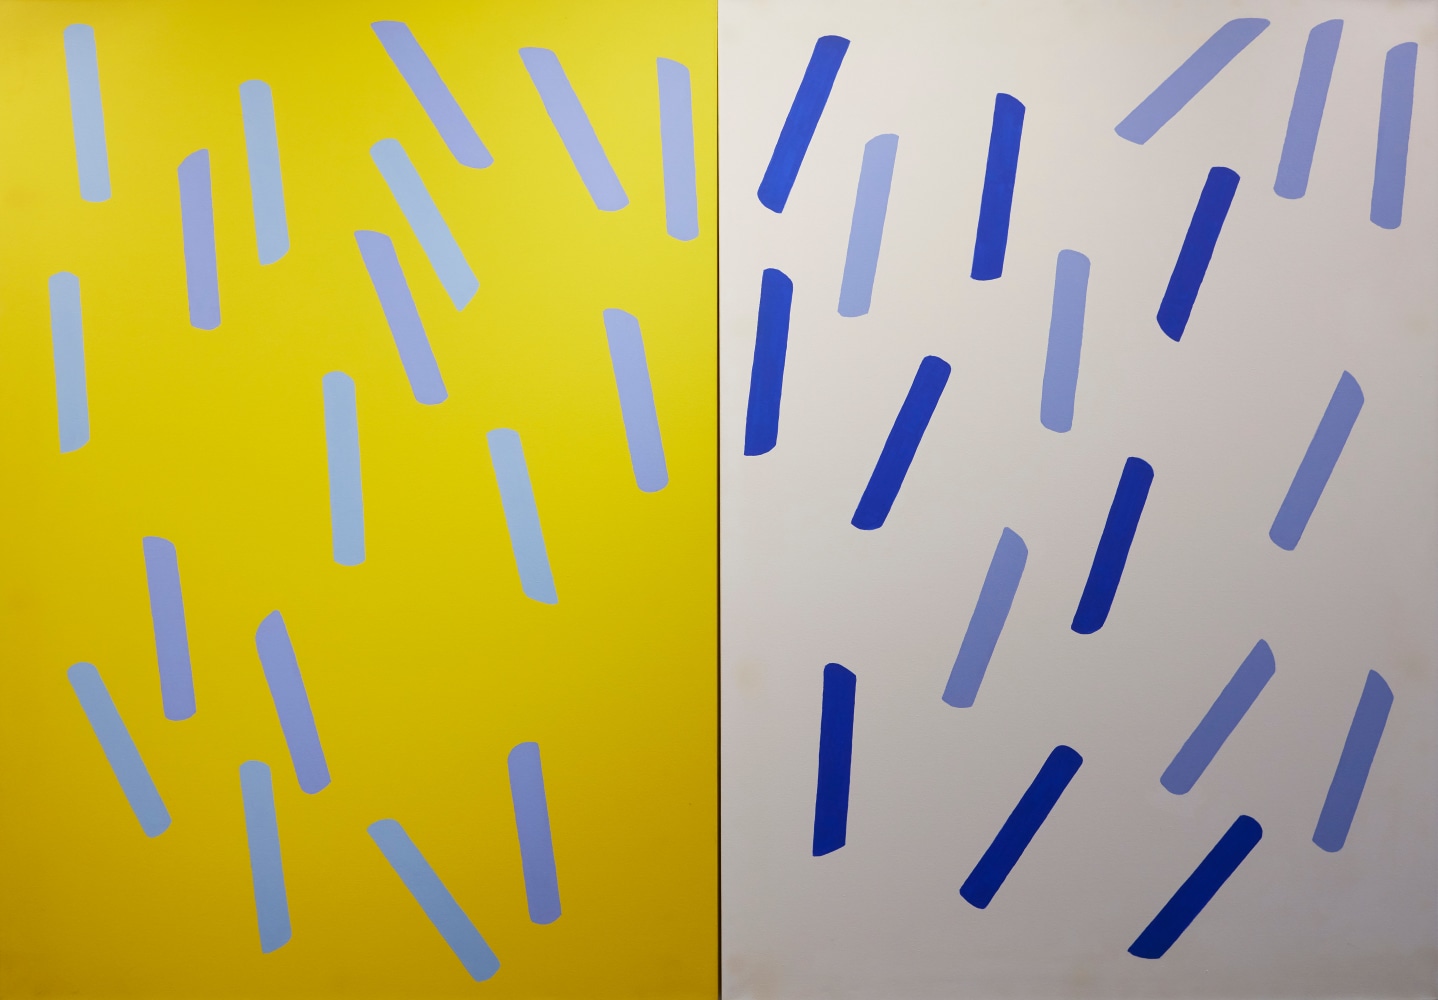 Untitled (White,Yellow), 2010
Acrylic onCanvas
70 x 100 inches